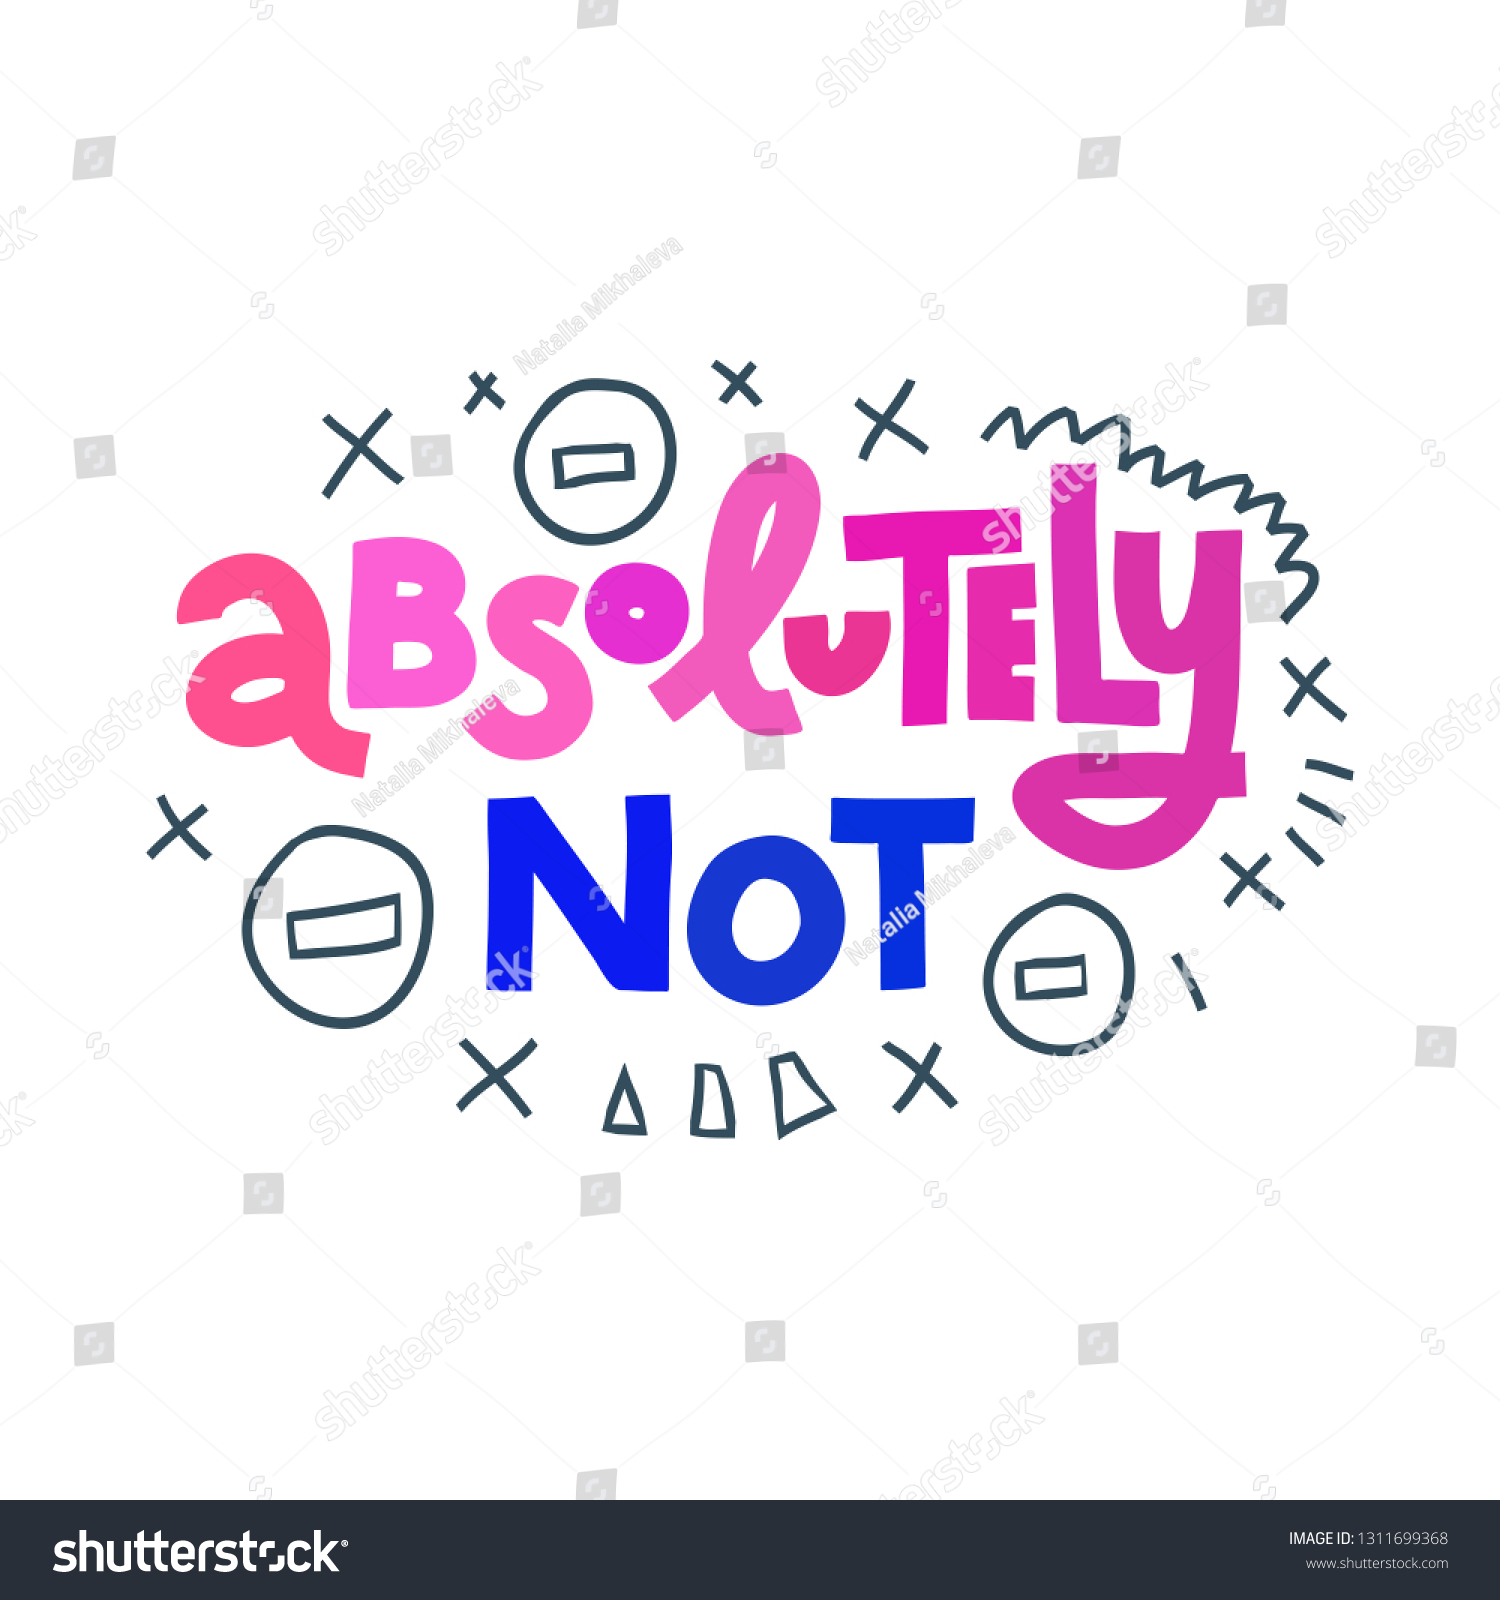 SVG of Colorful hand lettering vector illustration with exclamation phrase Absolutely Not and doodles. Frustration, irritation and anger, negative emotions, problem concept. Isolated on white background. svg